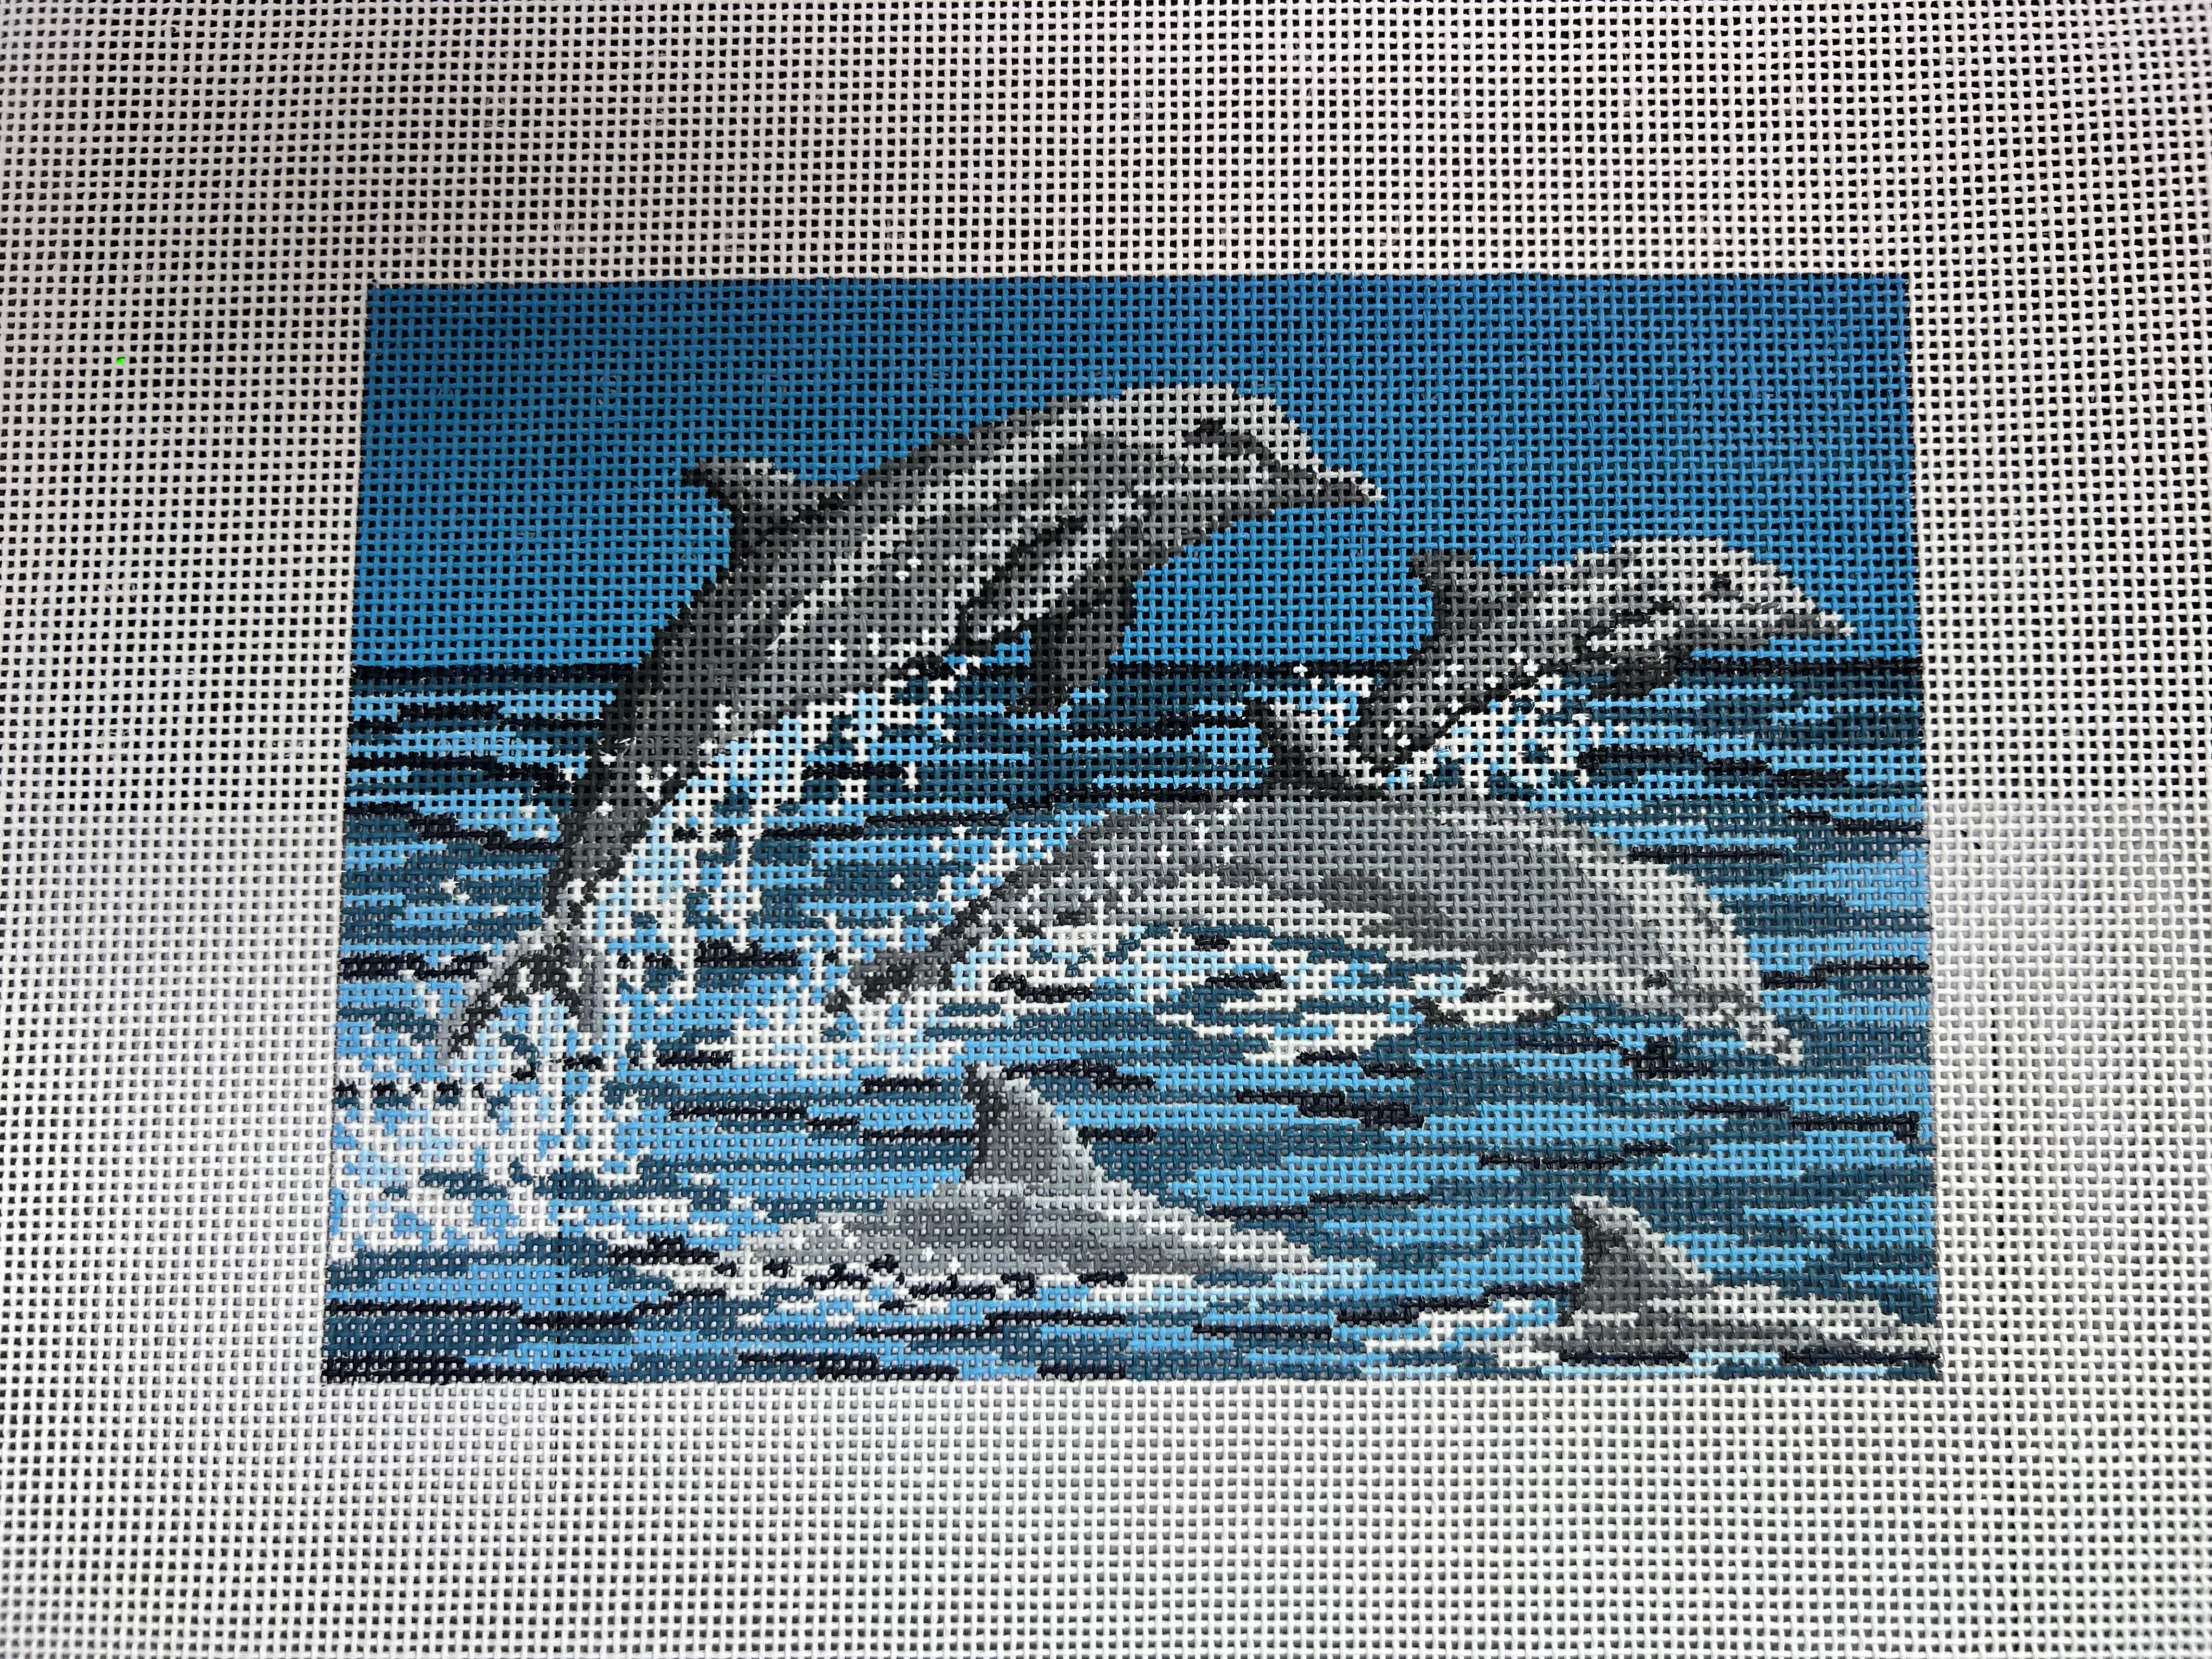 Frolicking Dolphins 1103